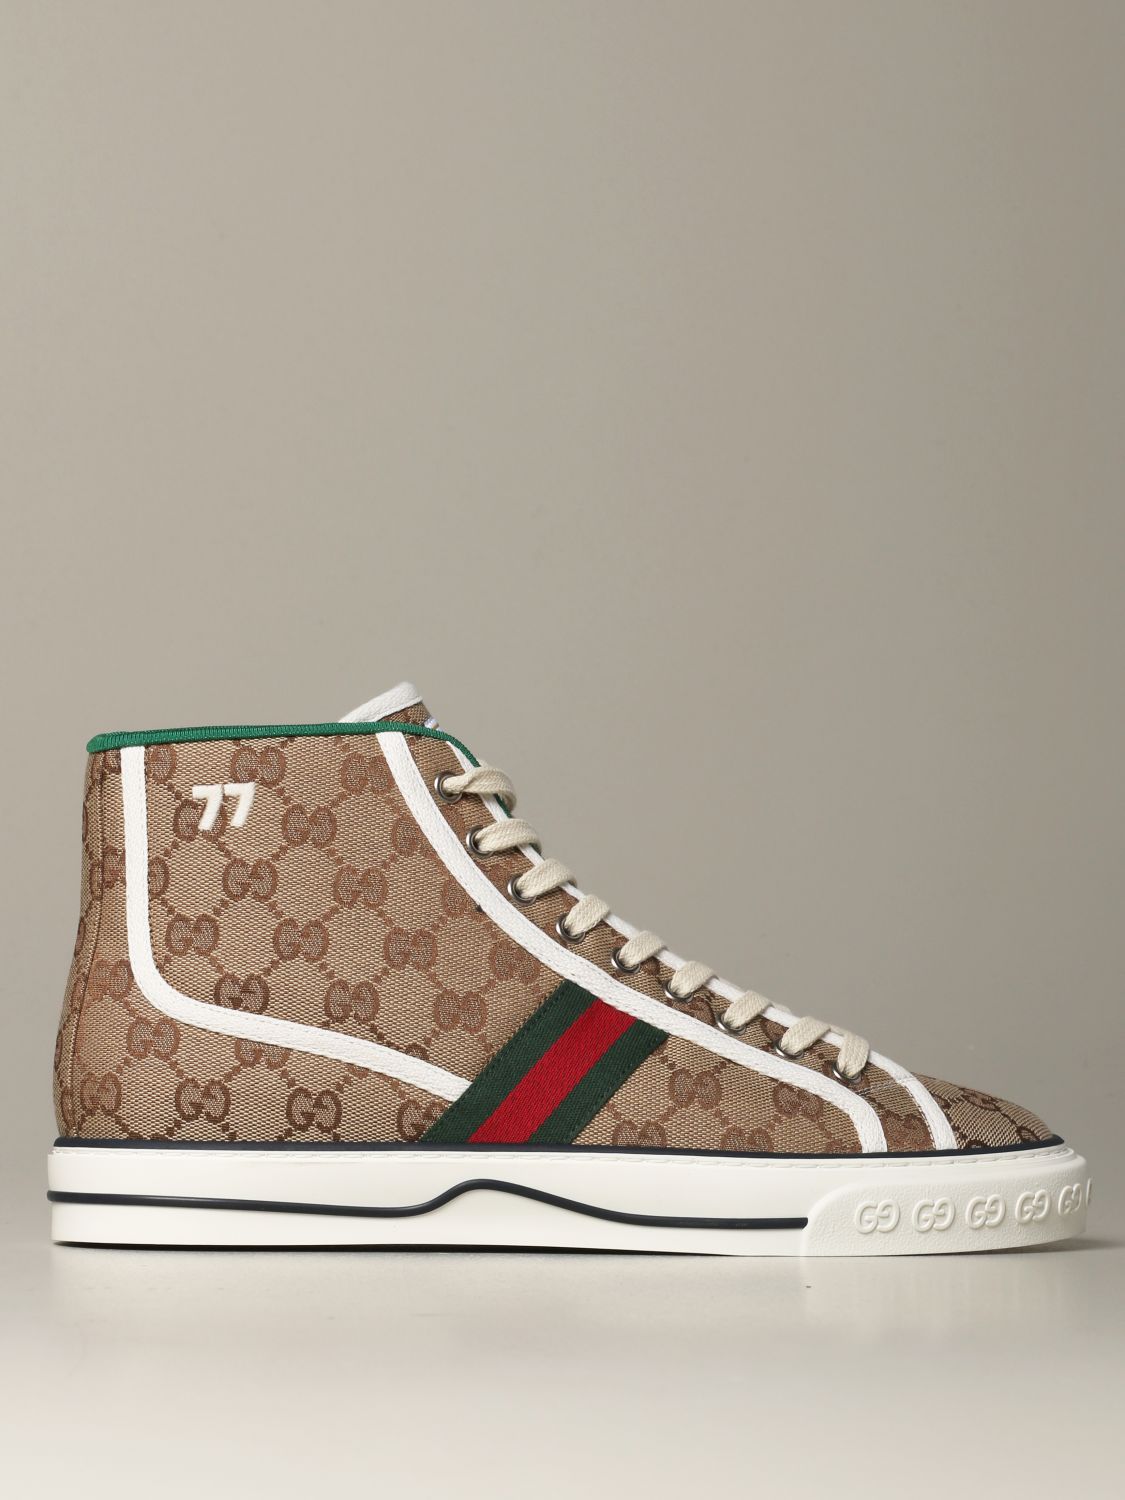 gucci inspired tennis shoes